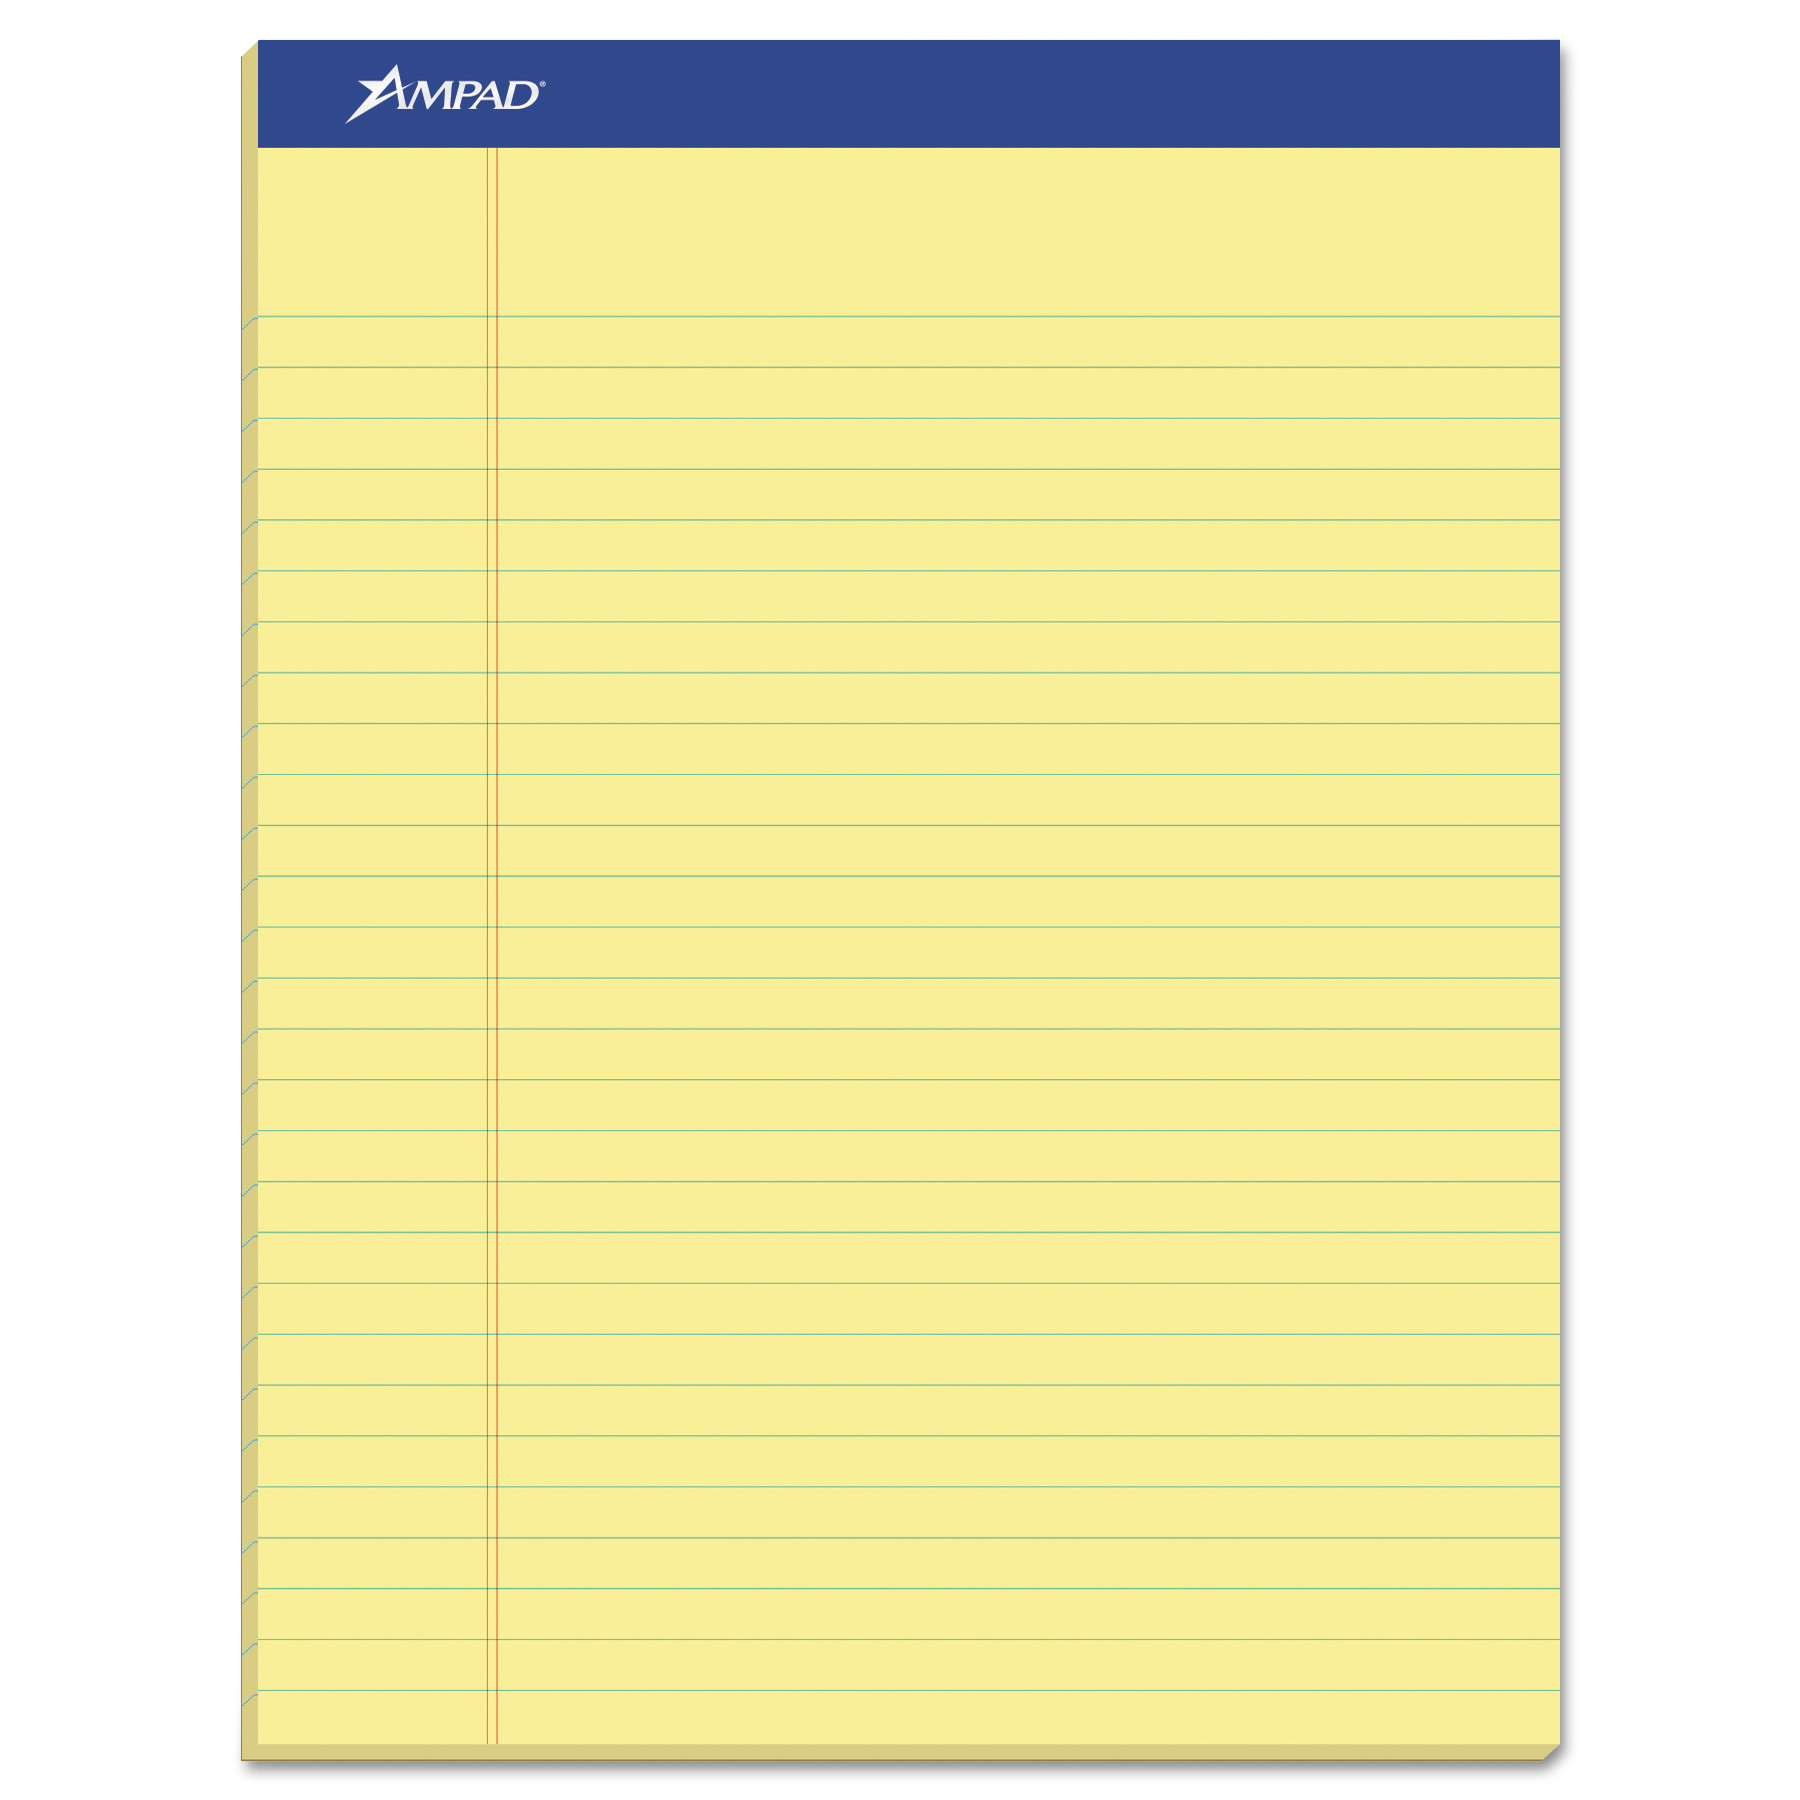  Ampad 20-270 Recycled Writing Pads, Wide/Legal Rule, 8.5 x 11.75, Canary, 50 Sheets, Dozen (TOP20270) 